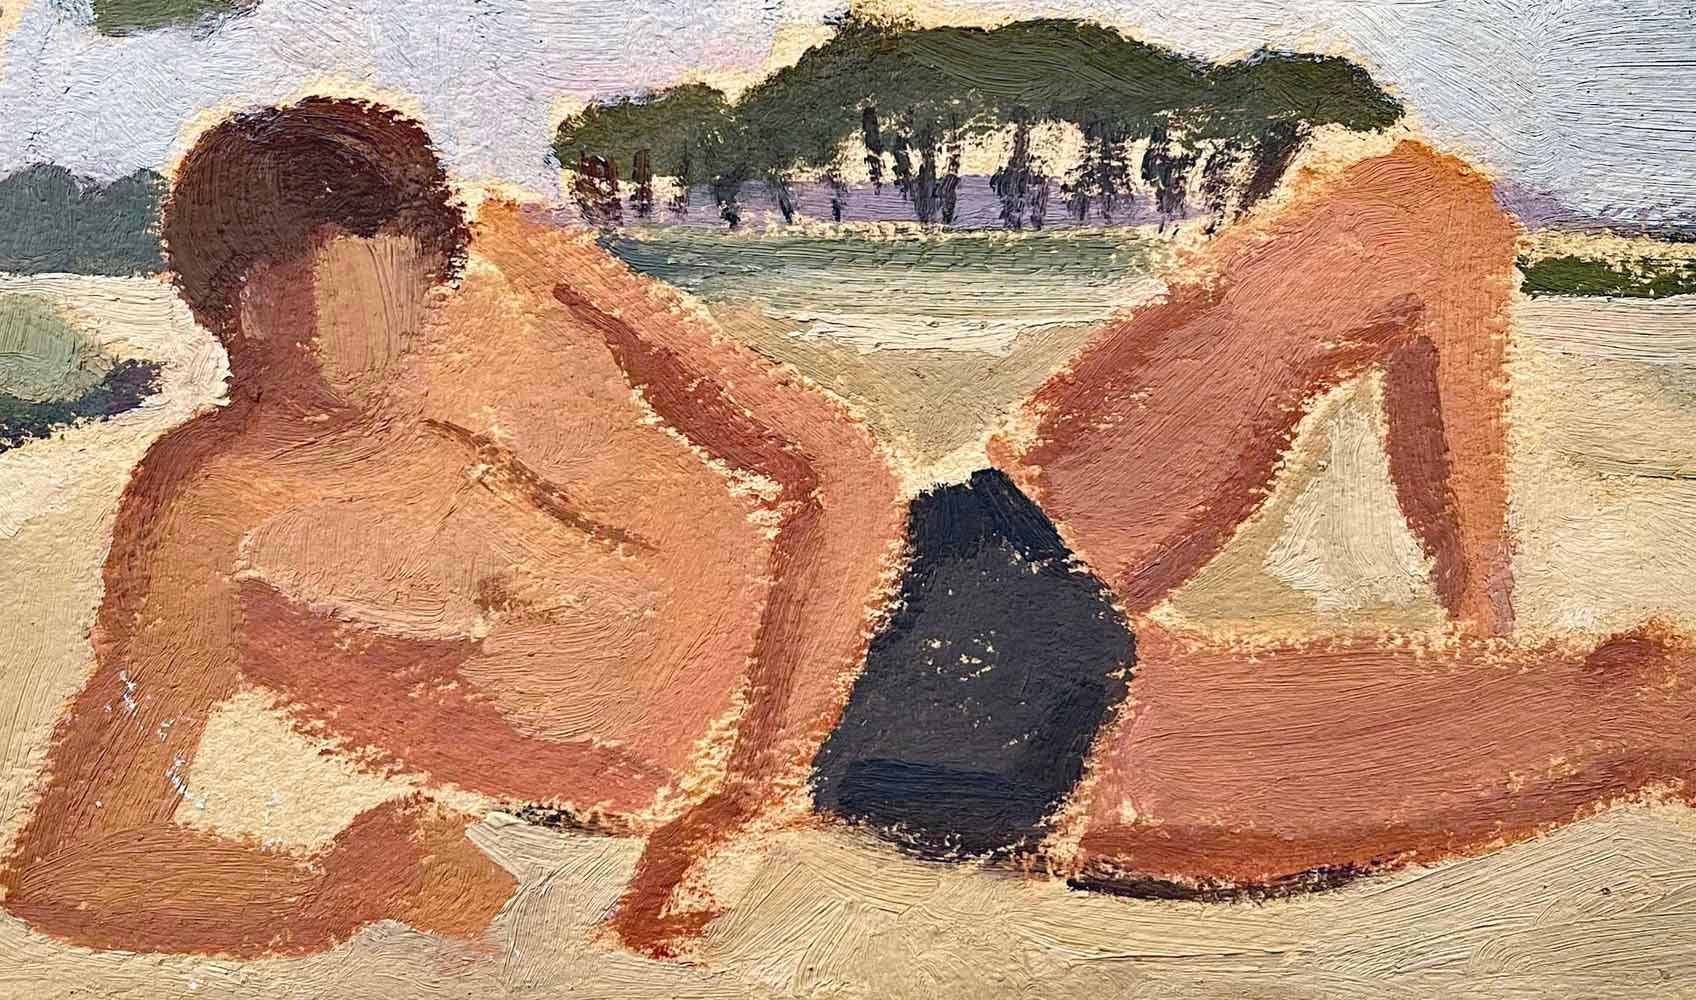 Charming and full of light, this gouache painting of a young man in a black swimsuit lounging on a wide beach was painted by Louise Alix in the 1950s.  The man's rosy complexion, the canopies of trees in the distance, and the pale blue sky, give